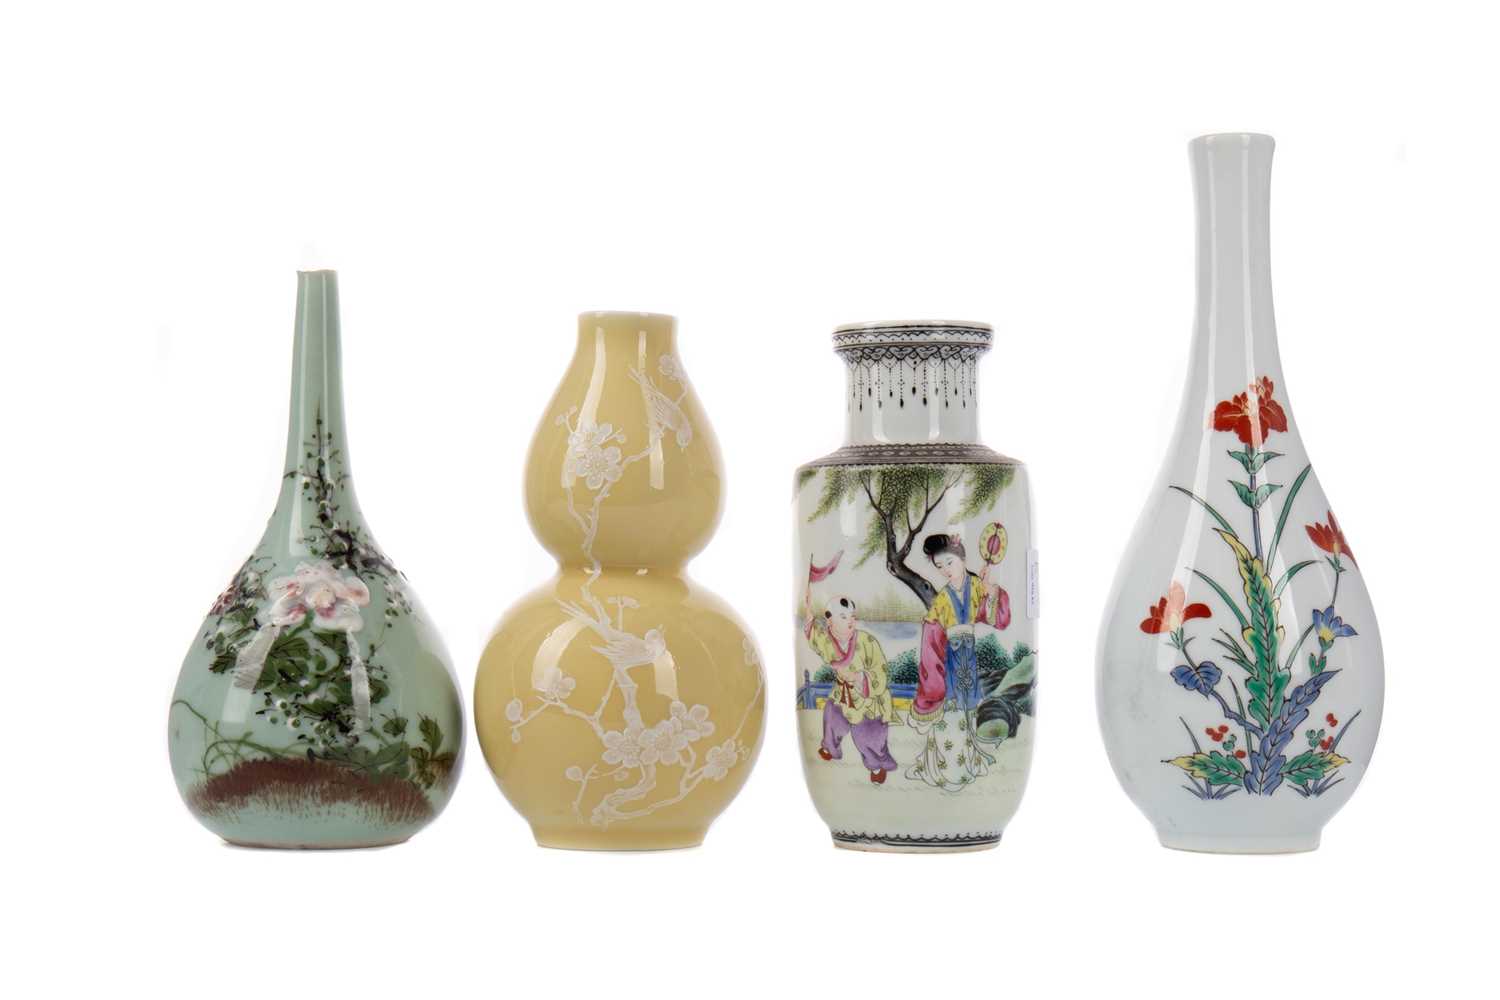 Lot 1837 - A CHINESE REPUBLIC BALUSTER VASE AND THREE OTHERS VASES